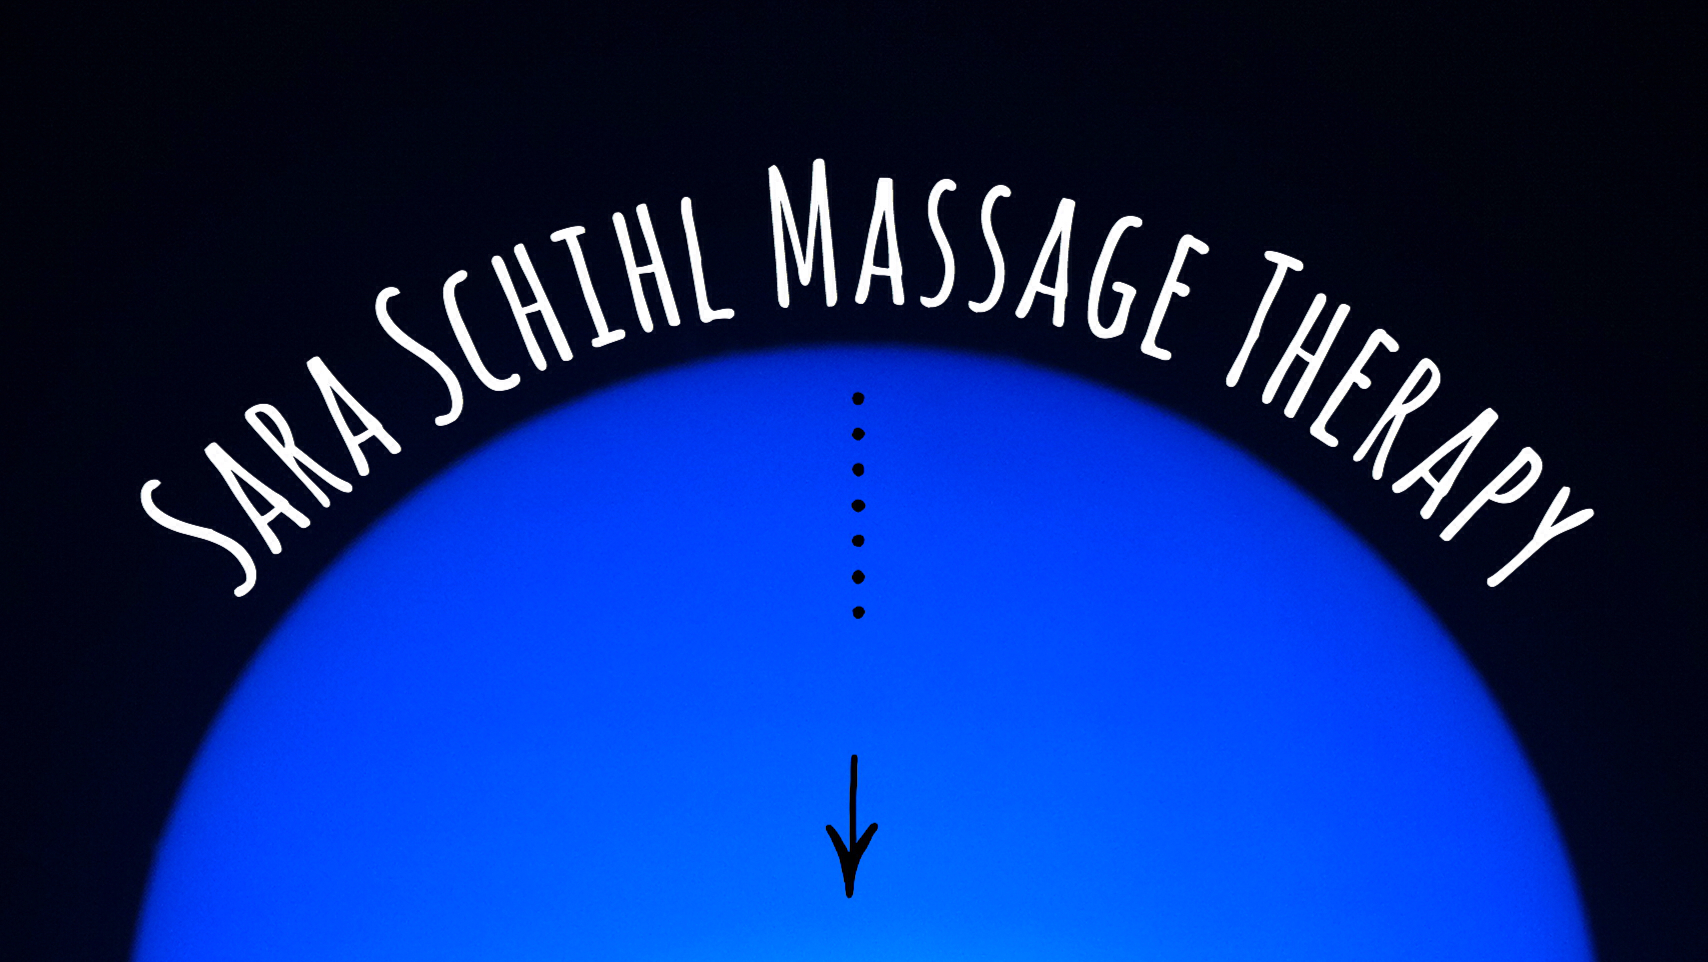 It is what it is massage therapy